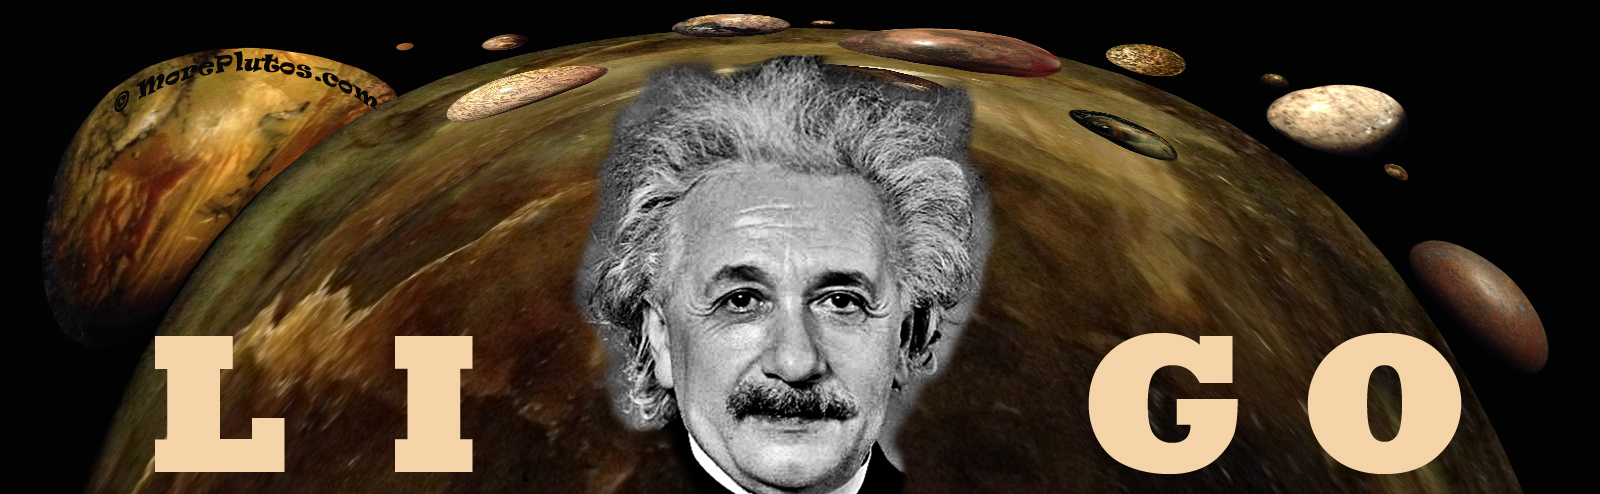 Einstein serenely enjoys LIGO's discovery of gravitational waves as the Dwarf Planets morph in response to his most weighty achievement